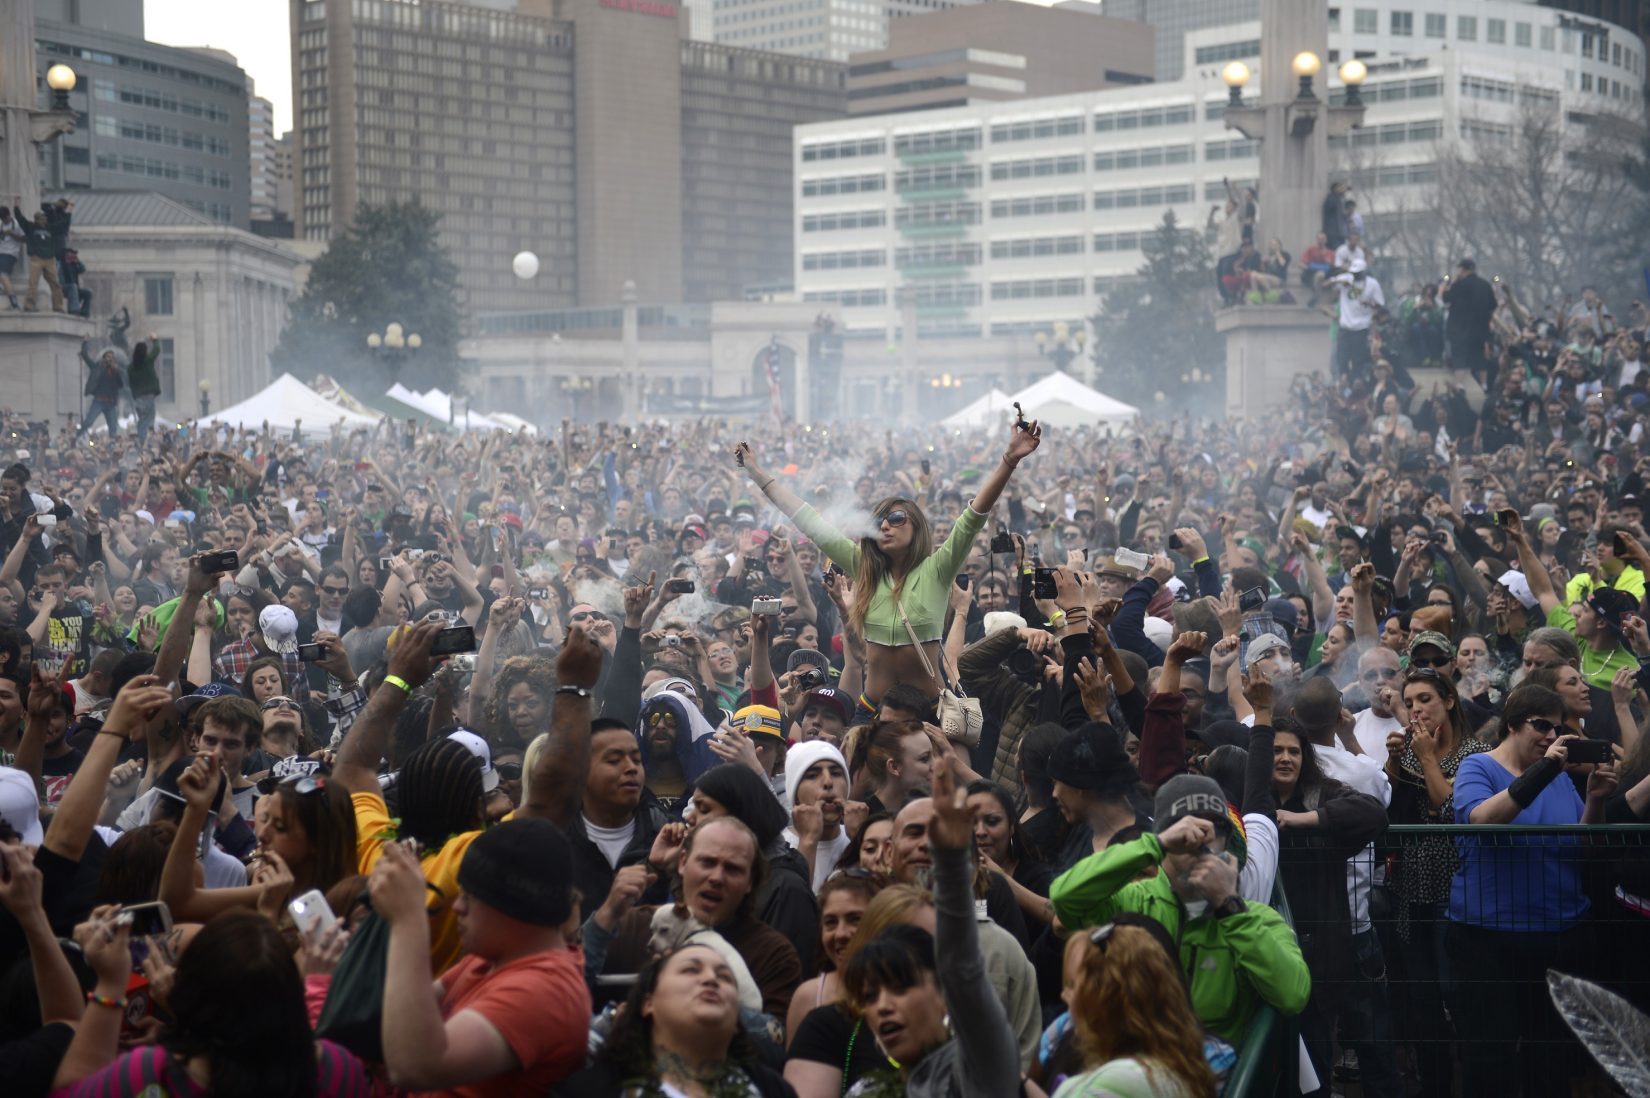 Your guide to 4/20 events in Denver concerts, food, high society